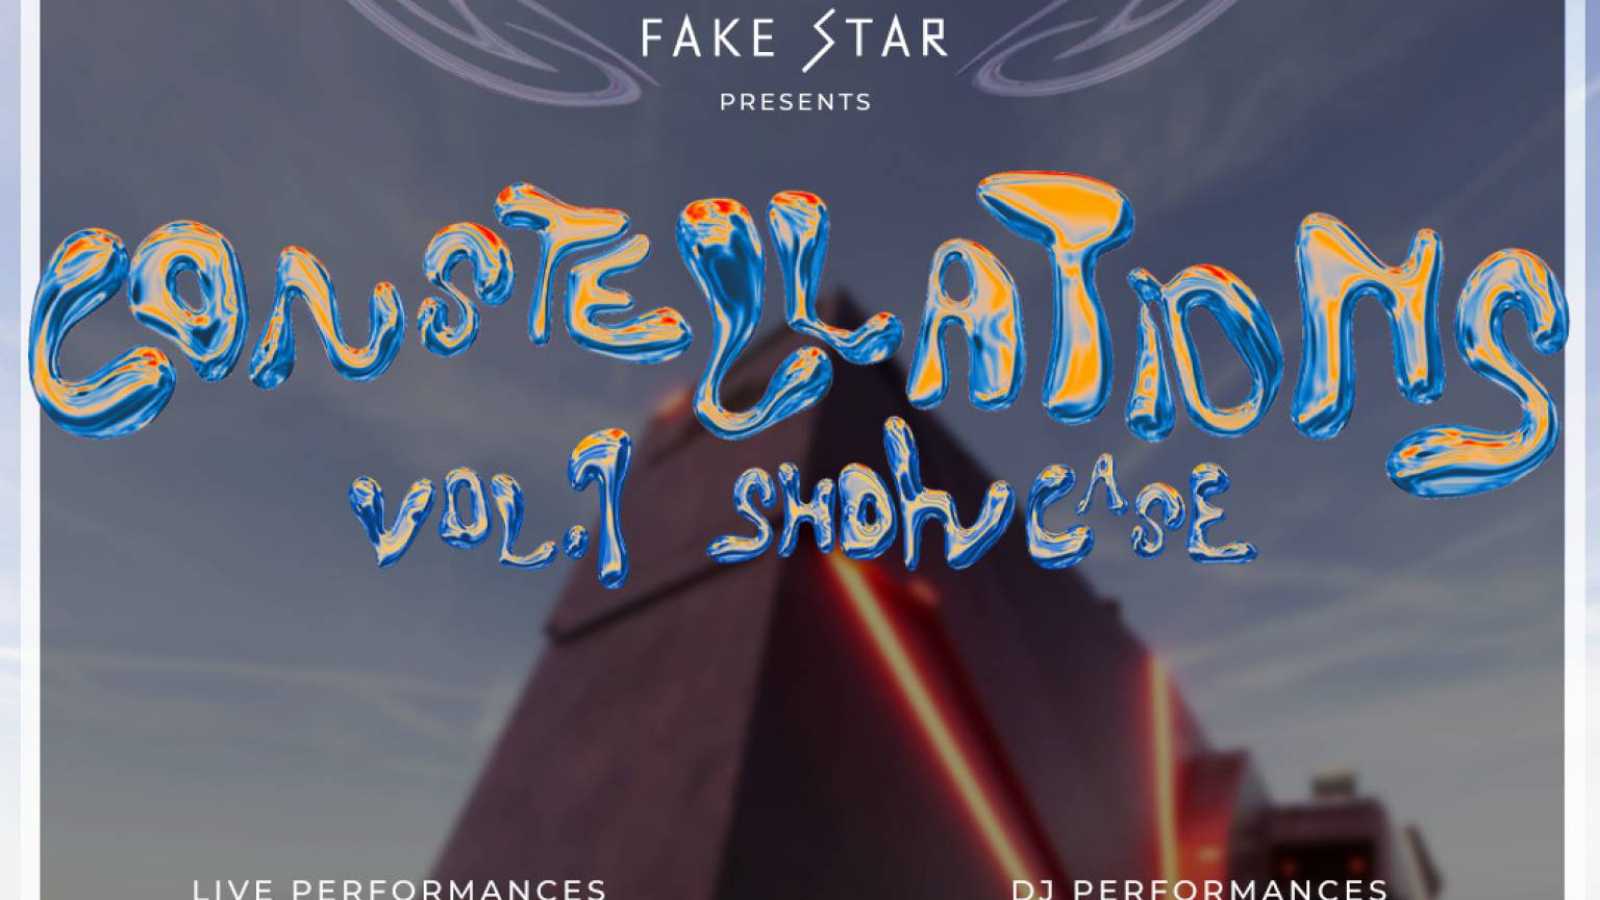 FAKE STAR to Present "Constellations" Showcase Concert Series © FAKE STAR USA. All rights reserved.